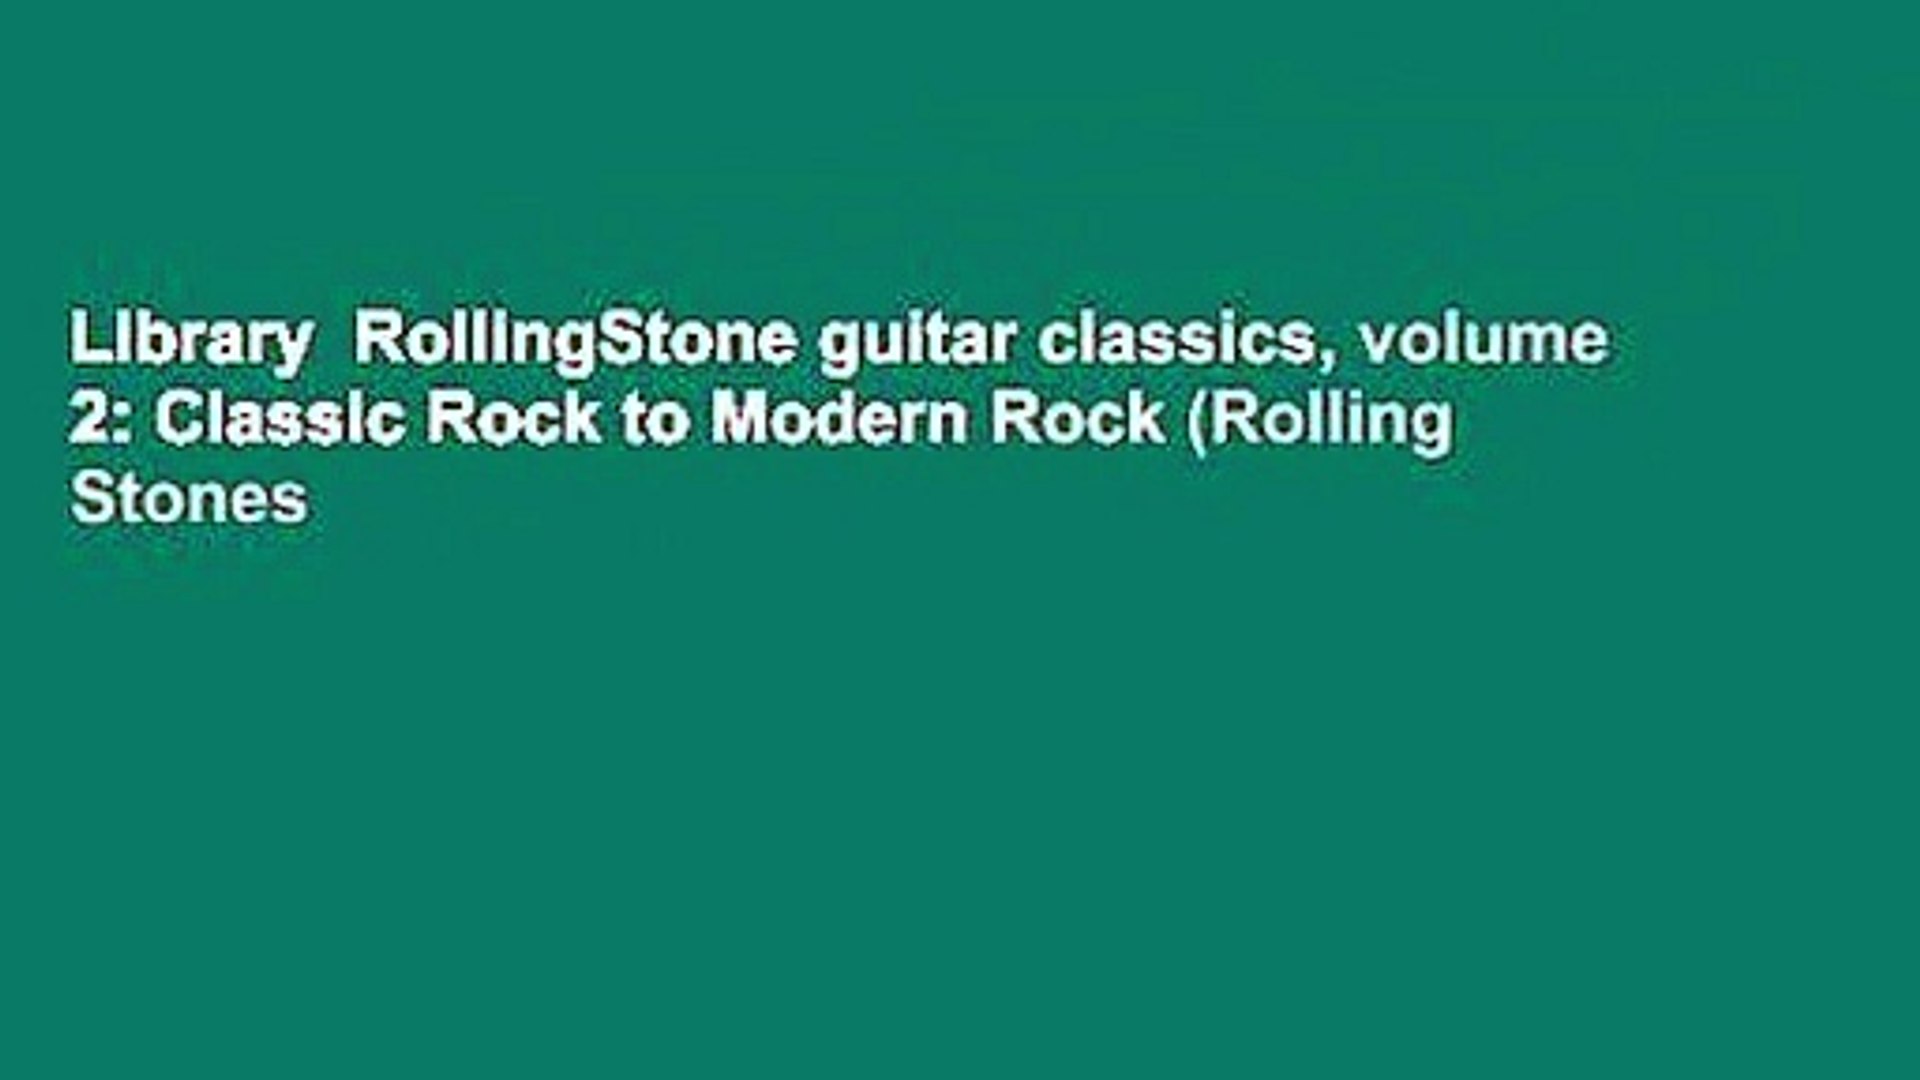 Library  RollingStone guitar classics, volume 2: Classic Rock to Modern Rock (Rolling Stones